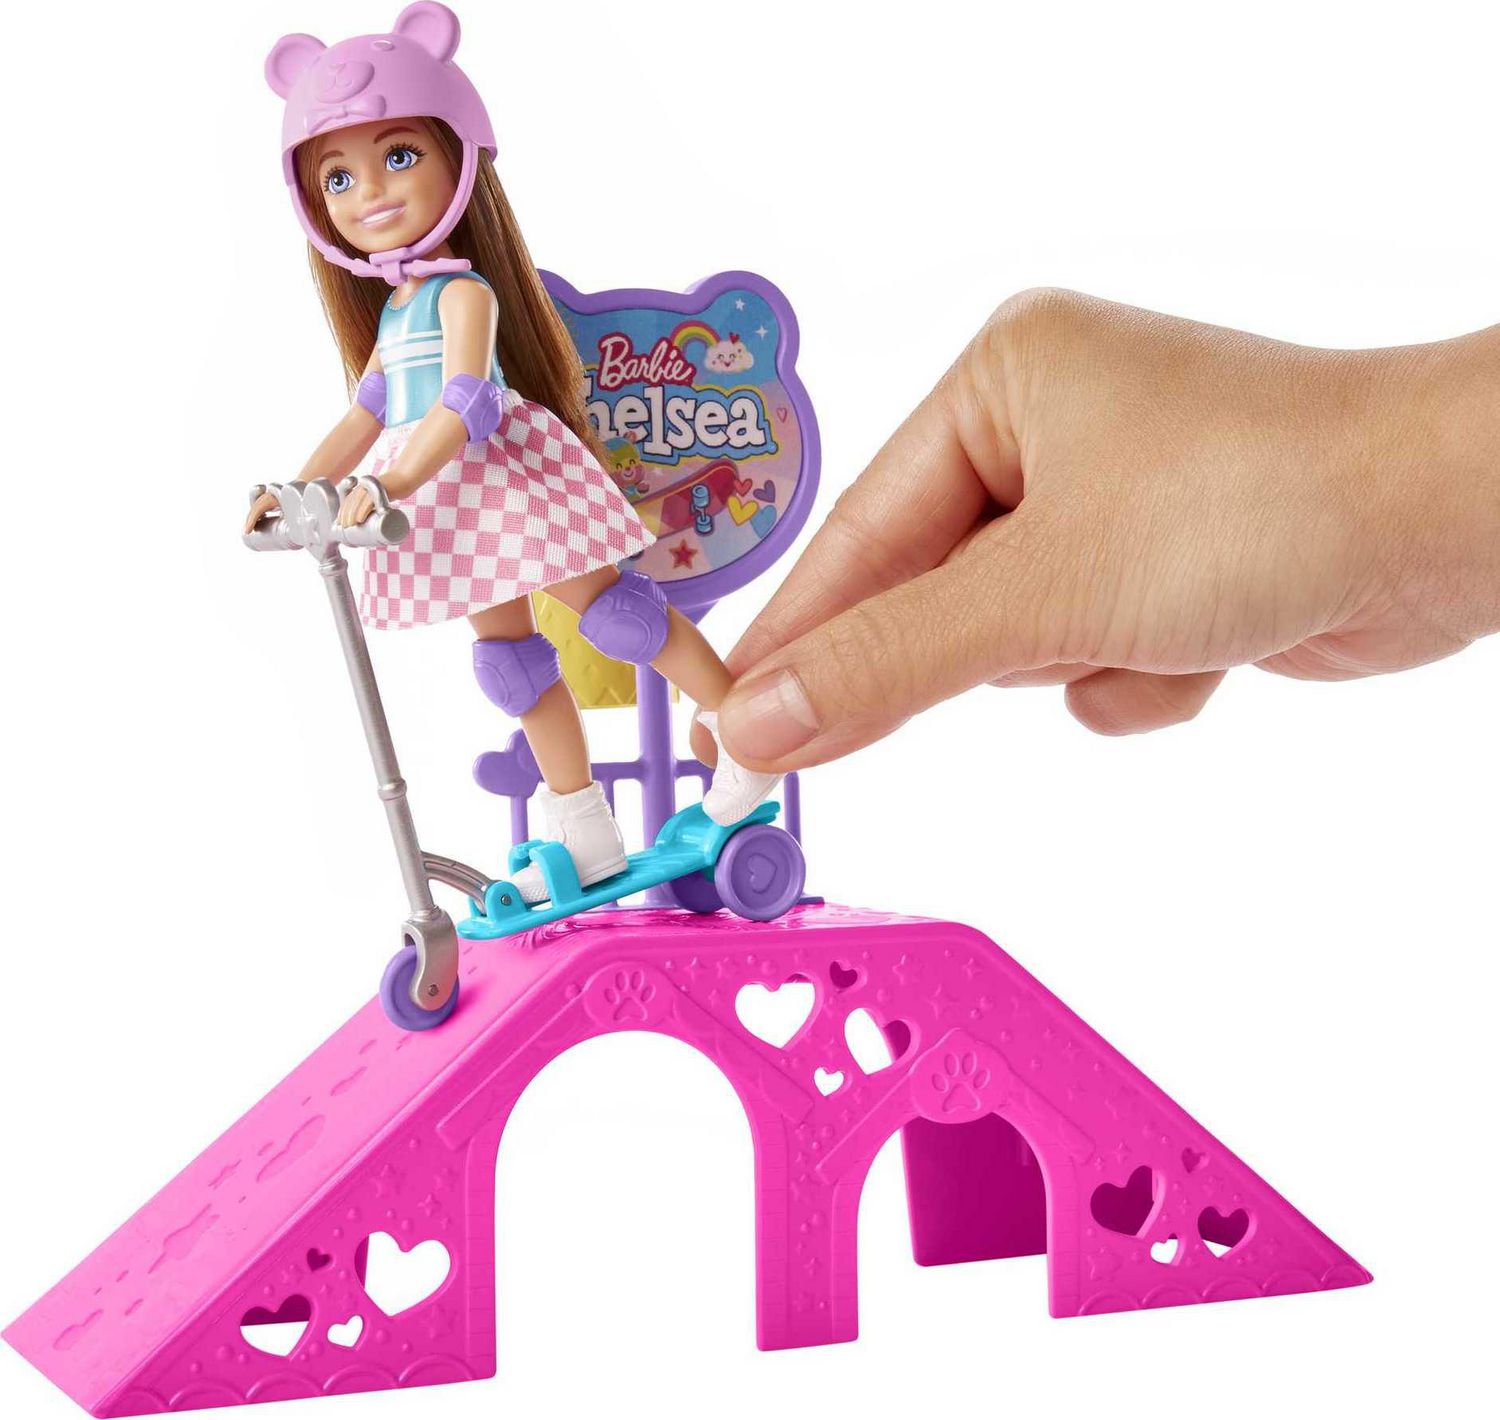 Barbie Toys, Chelsea Doll and Accessories, Skatepark Playset with